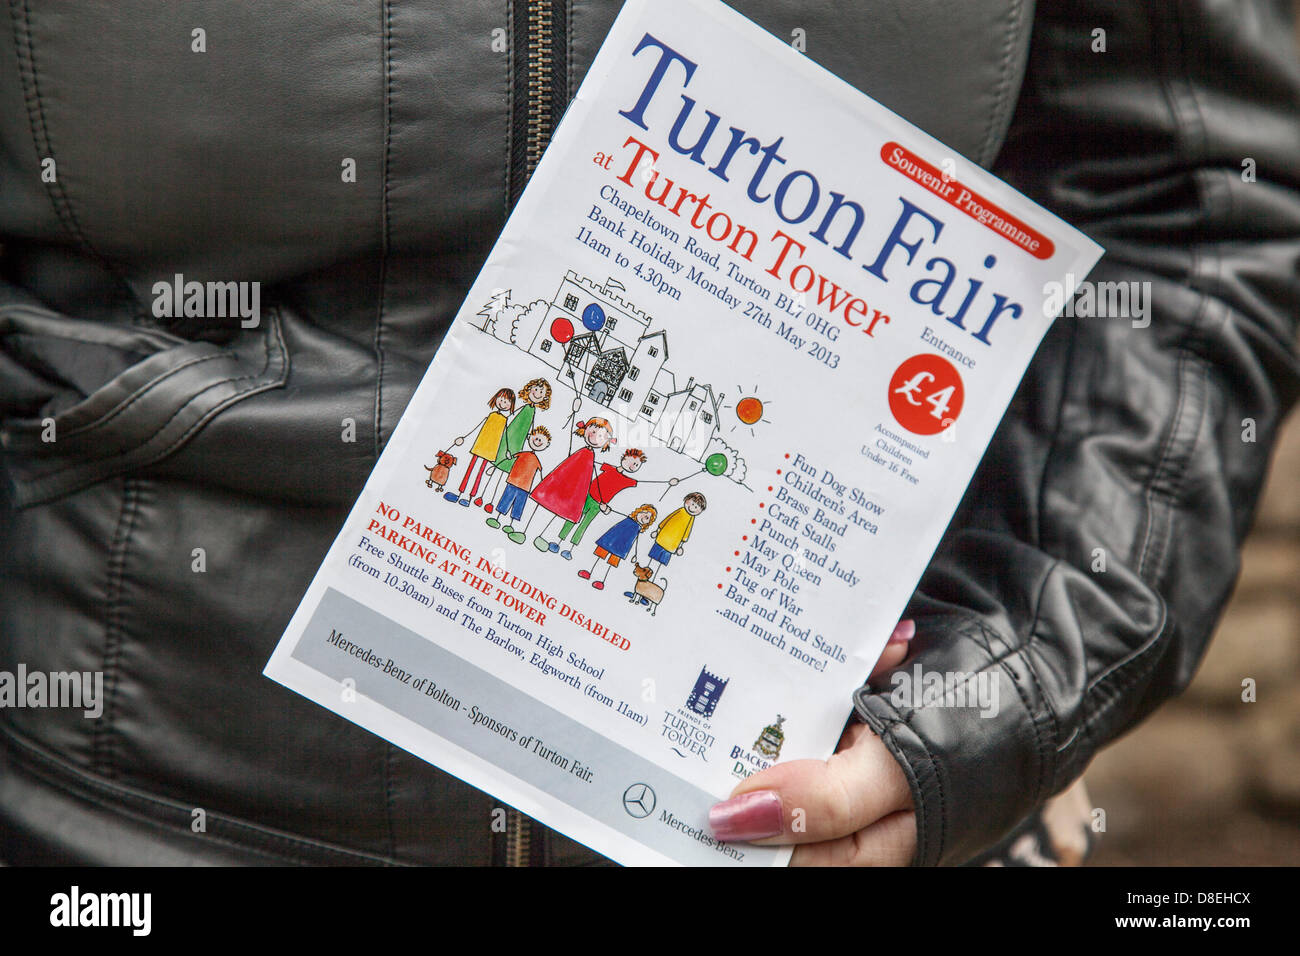 Turton tower, Lancashire, UK 27th May 2013.  Programme of events at the annual traditional spring fair held in the grounds of the 600-year-old Turton Tower.  The event dates back more than 200 years, but went into decline in the early 20th century. It was revived in 2008 by the Friends of Turton Tower. Stock Photo